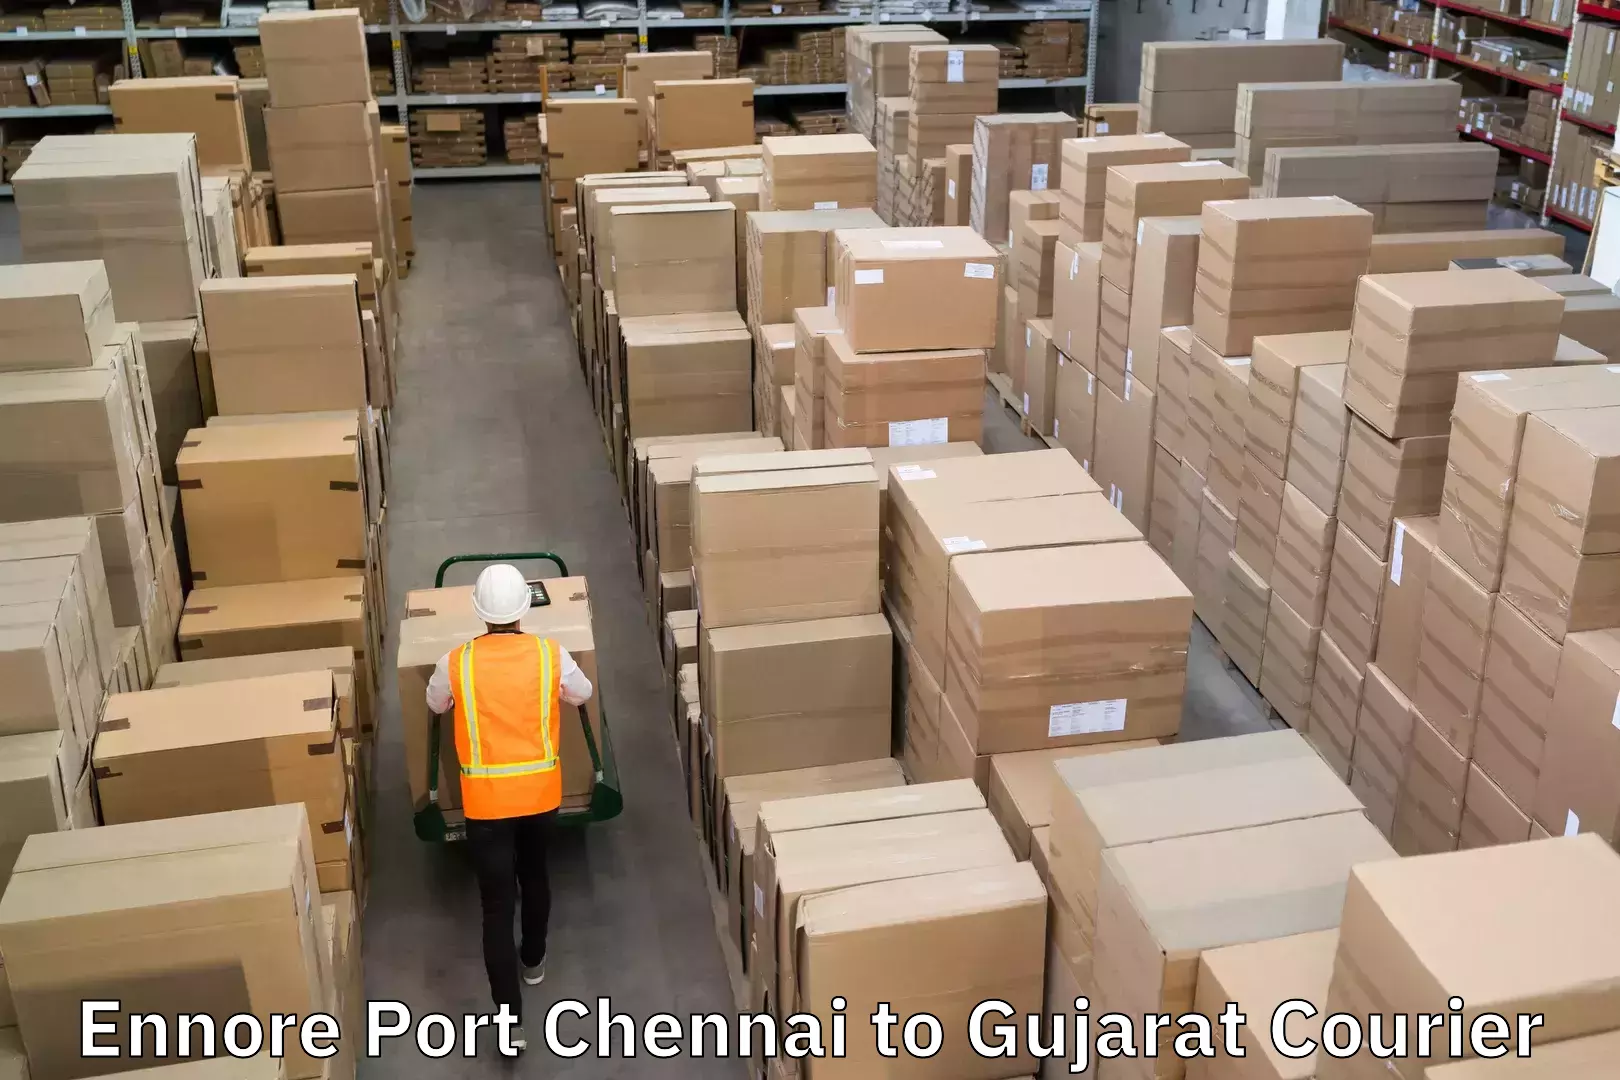 Courier service booking Ennore Port Chennai to Gujarat